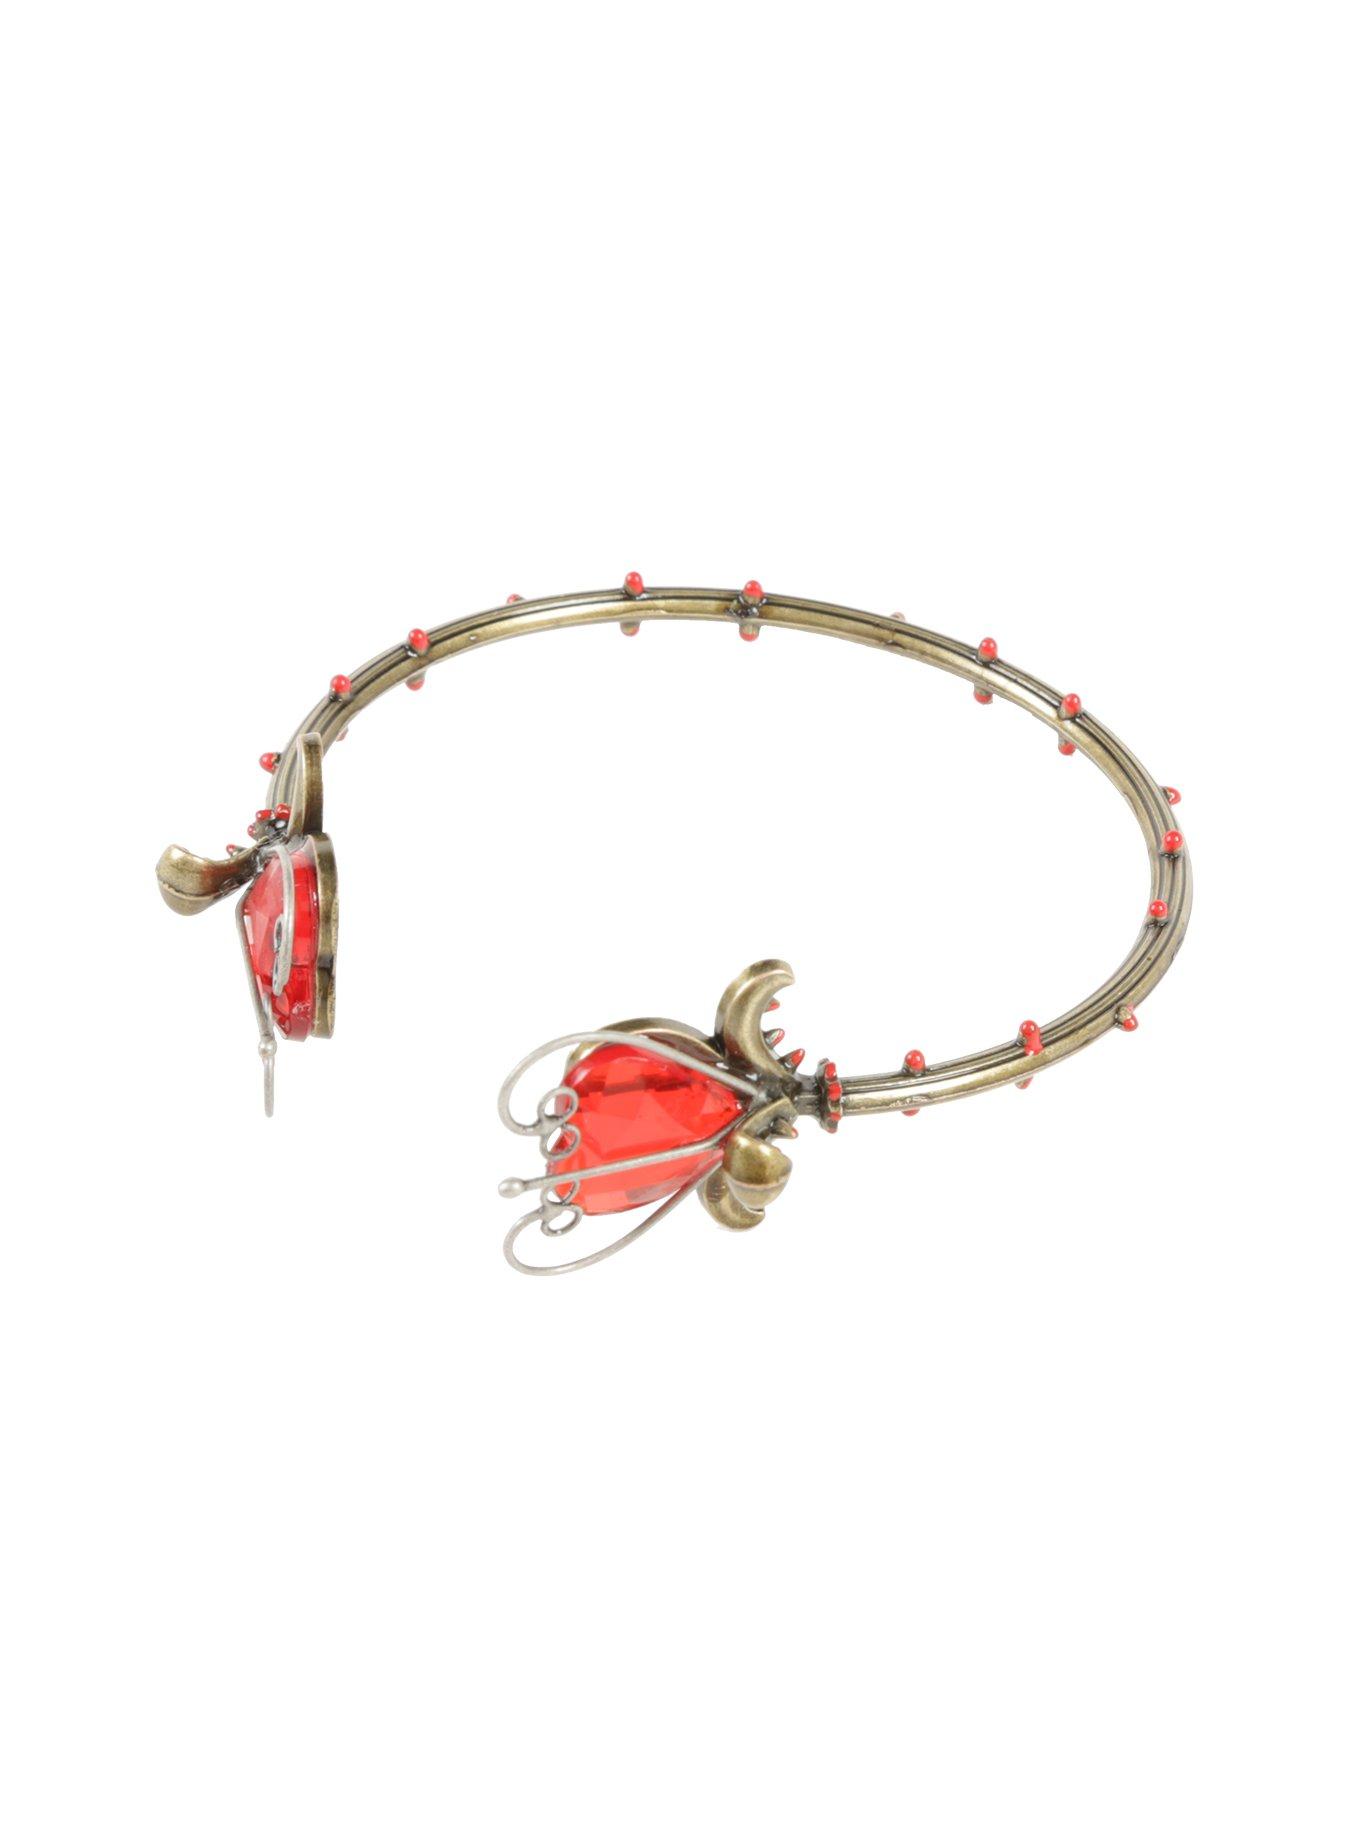 Disney Alice Through The Looking Glass Rose Thorn Cuff Bracelet, , hi-res